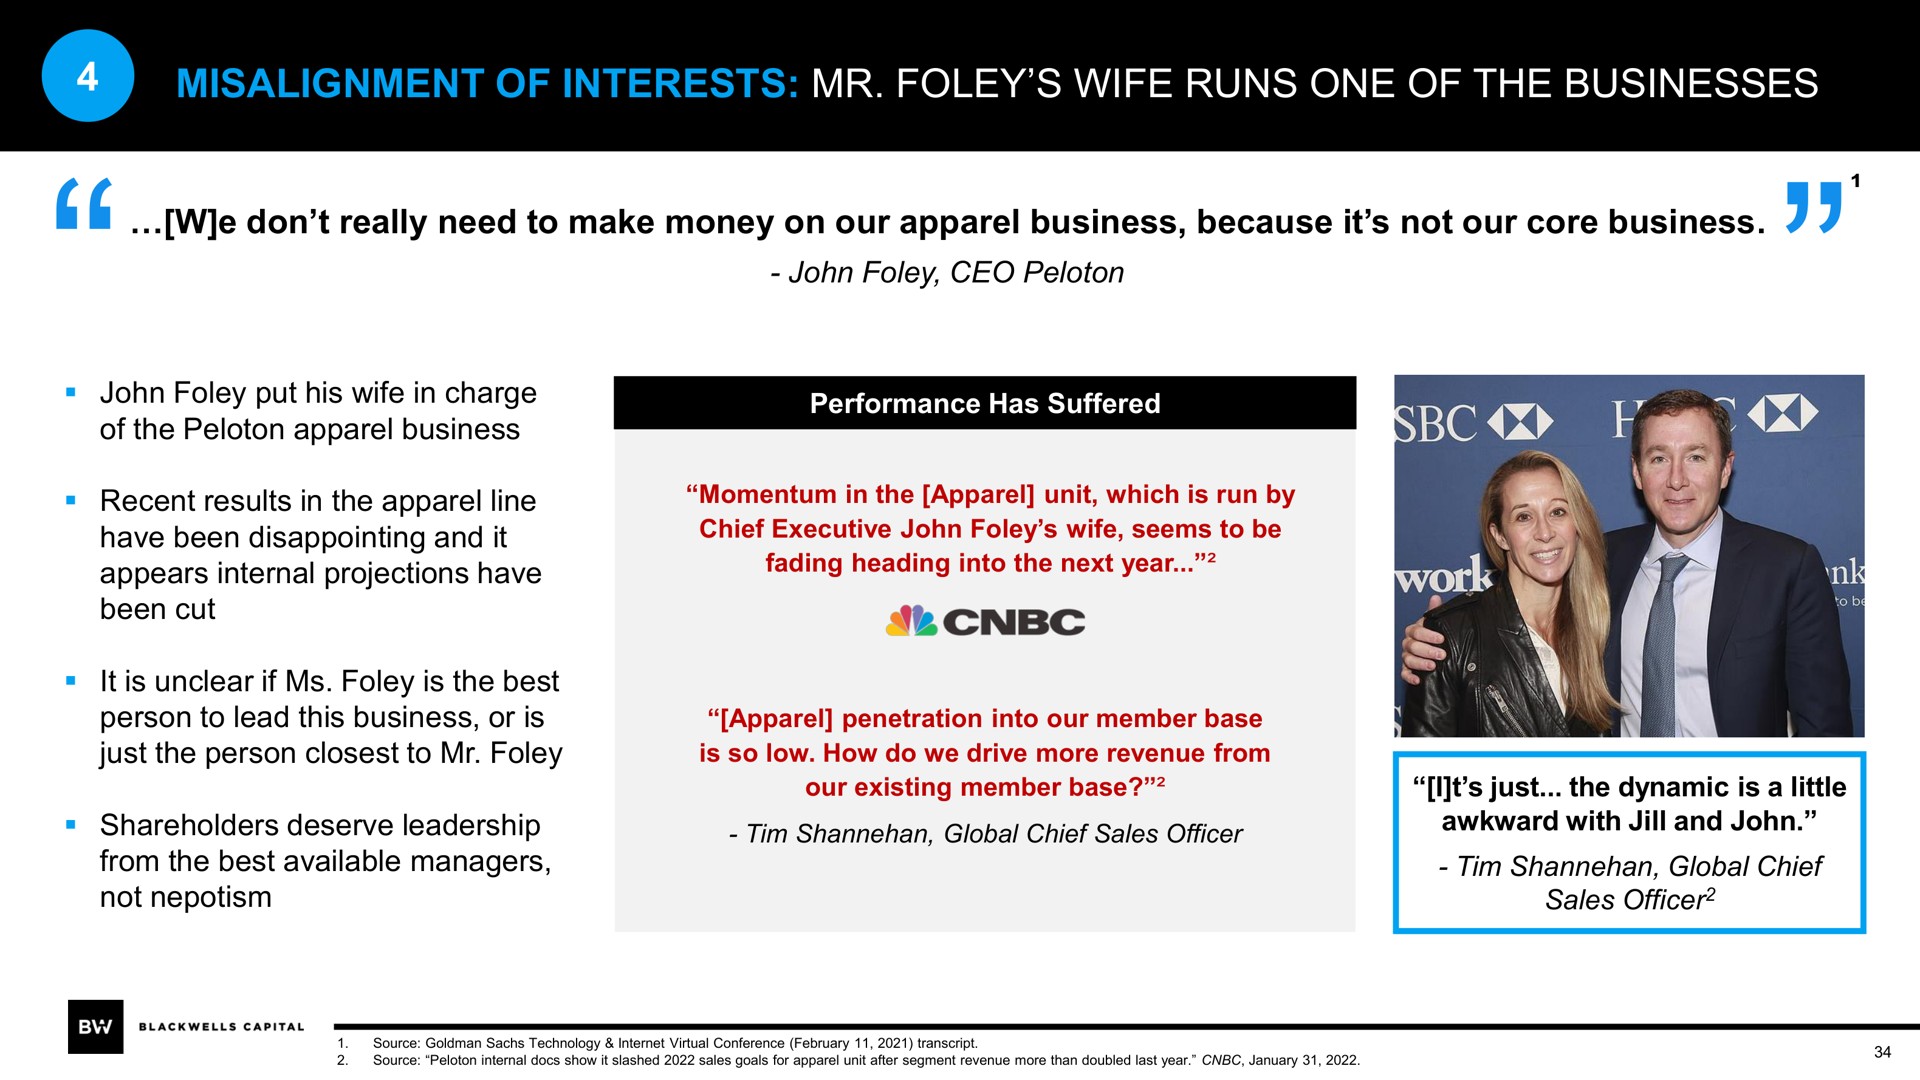 misalignment of interests wife runs one of the businesses shareholders deserve leadership global chief sales officer awkward | Blackwells Capital